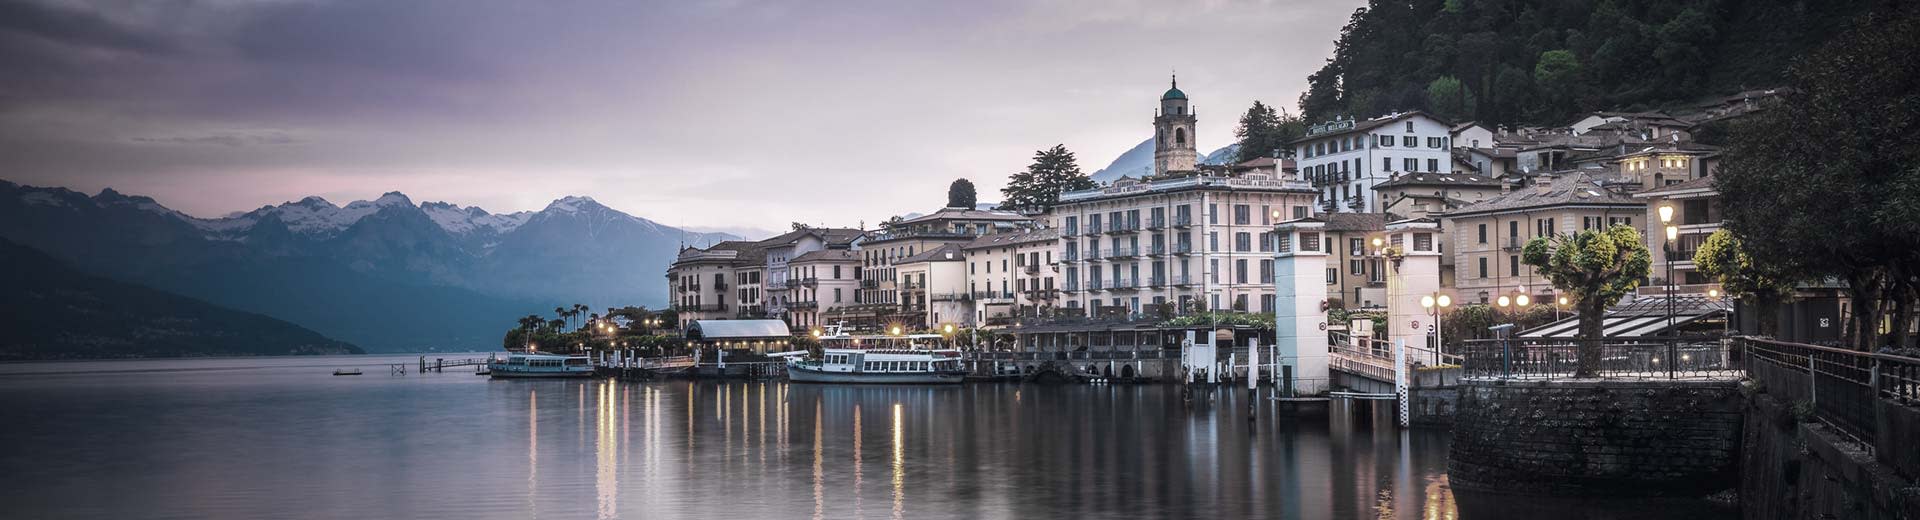 The beautiful building of Como line the shore of the lake at half light